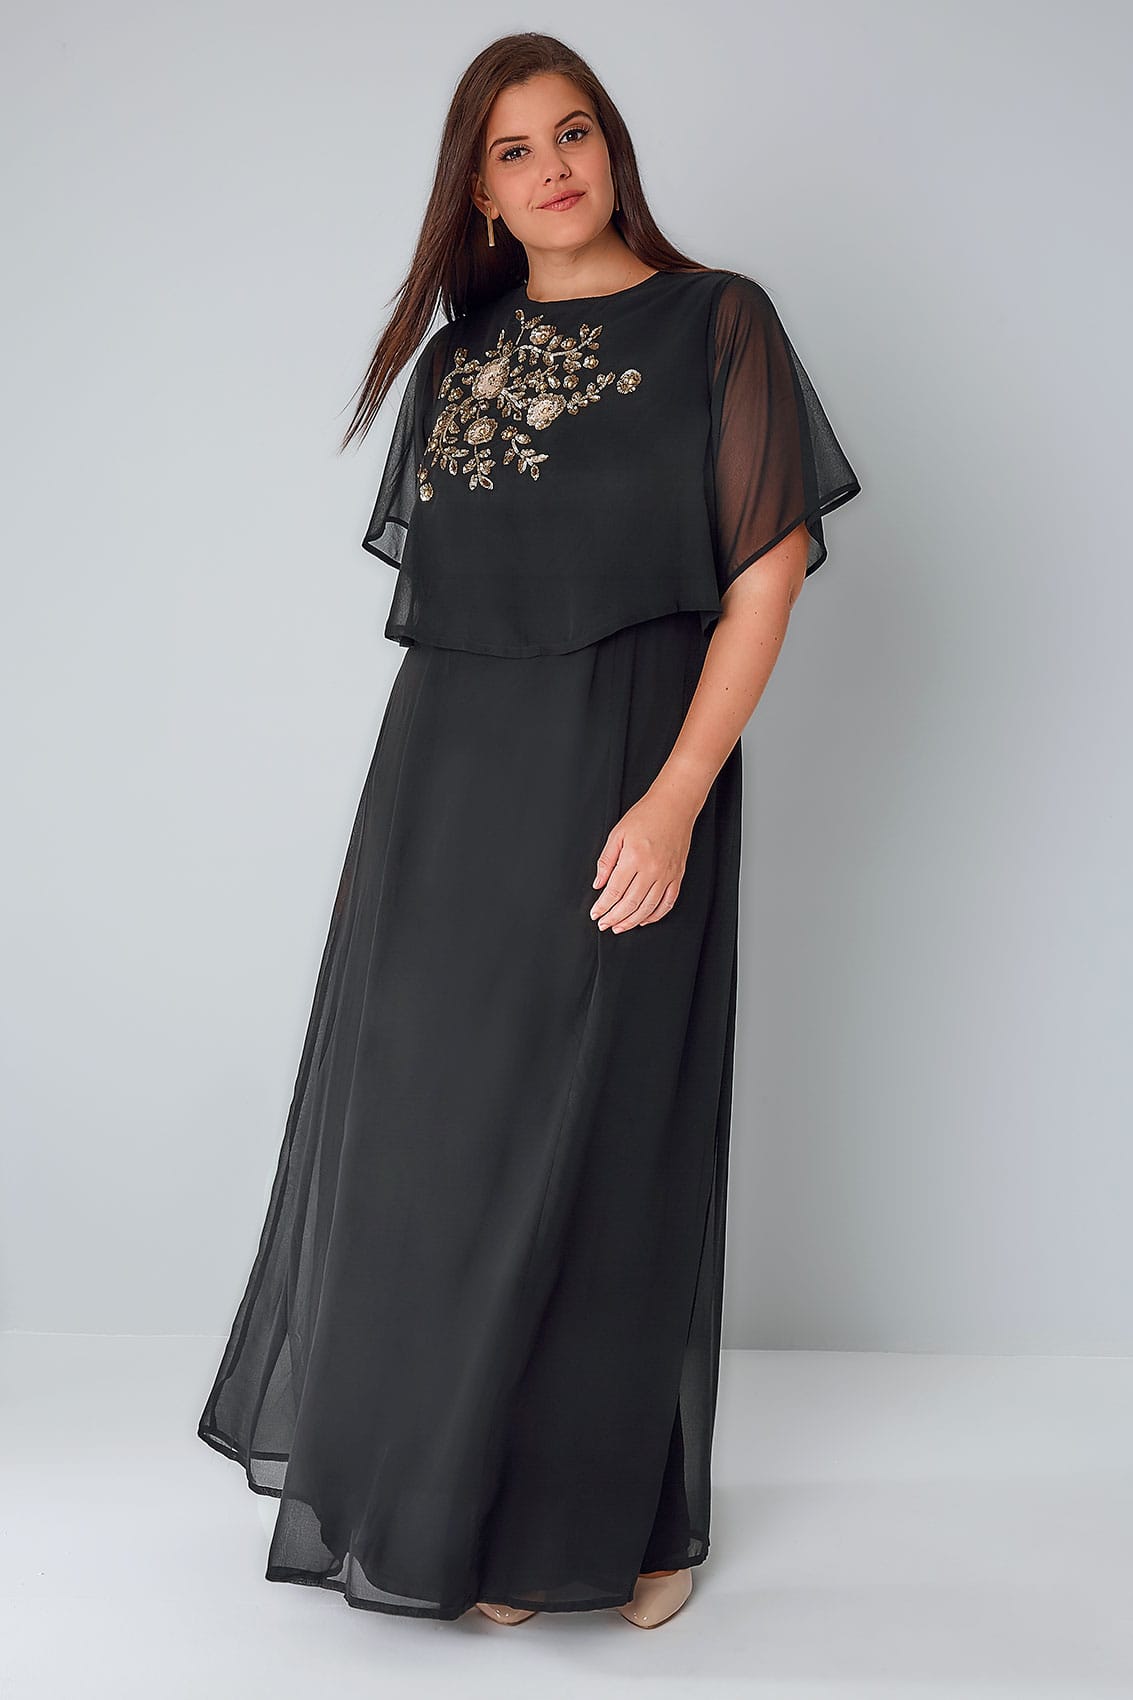 Black Chiffon Maxi Dress With Cape Back & Sequin Floral Embroidery ...